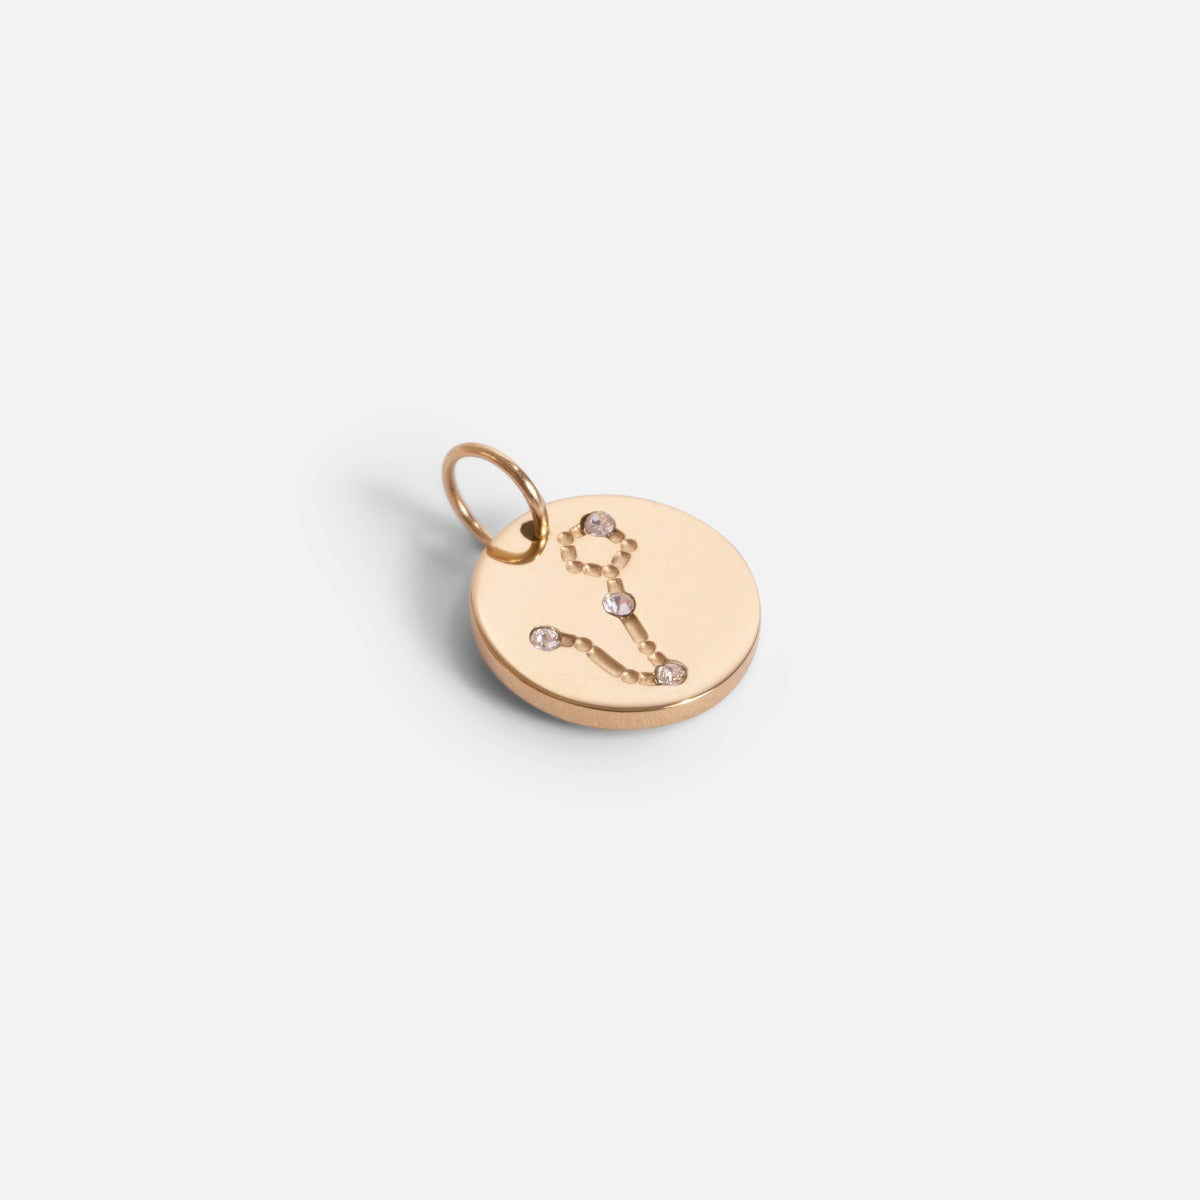 Small golden charm engraved with the zodiac constellation "pisces"